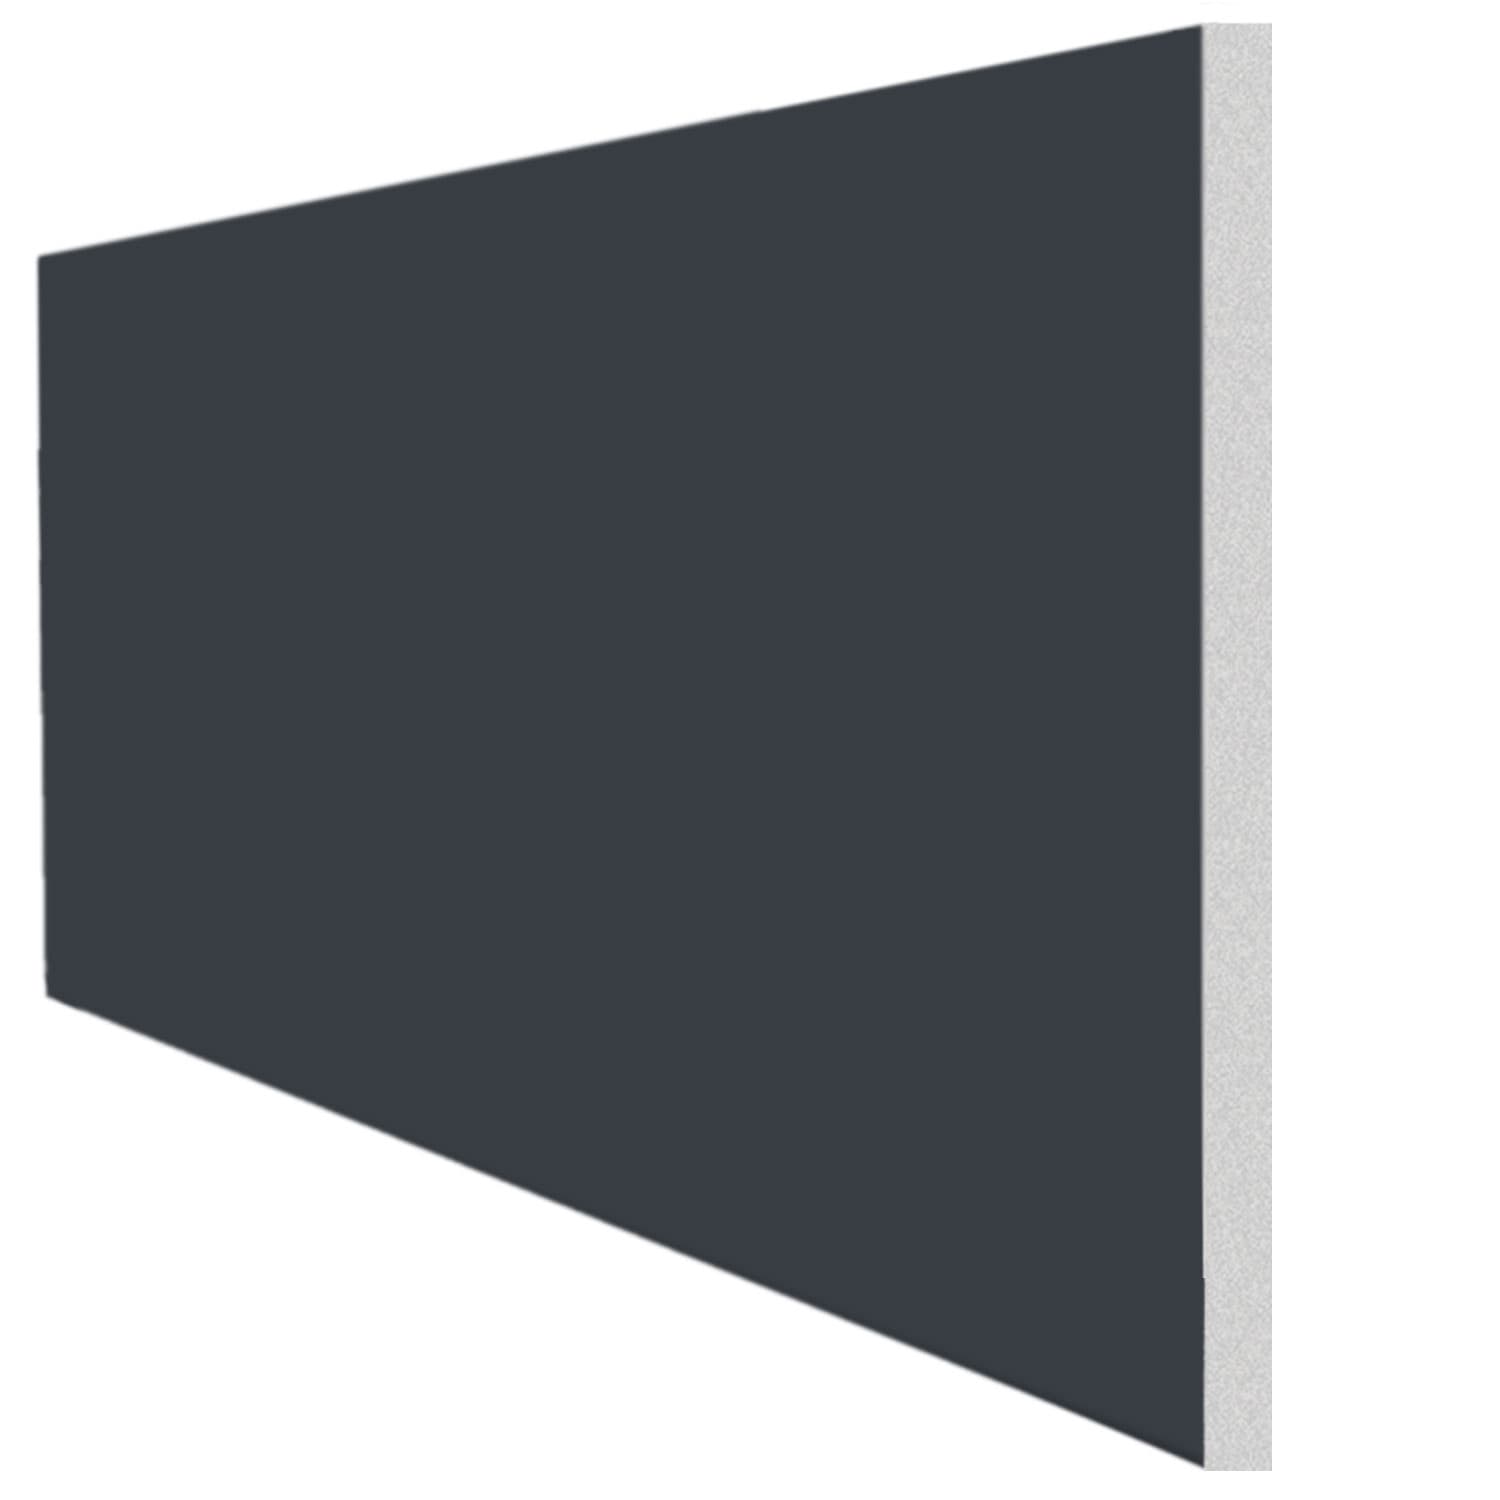 Anthracite Grey General Purpose Boards